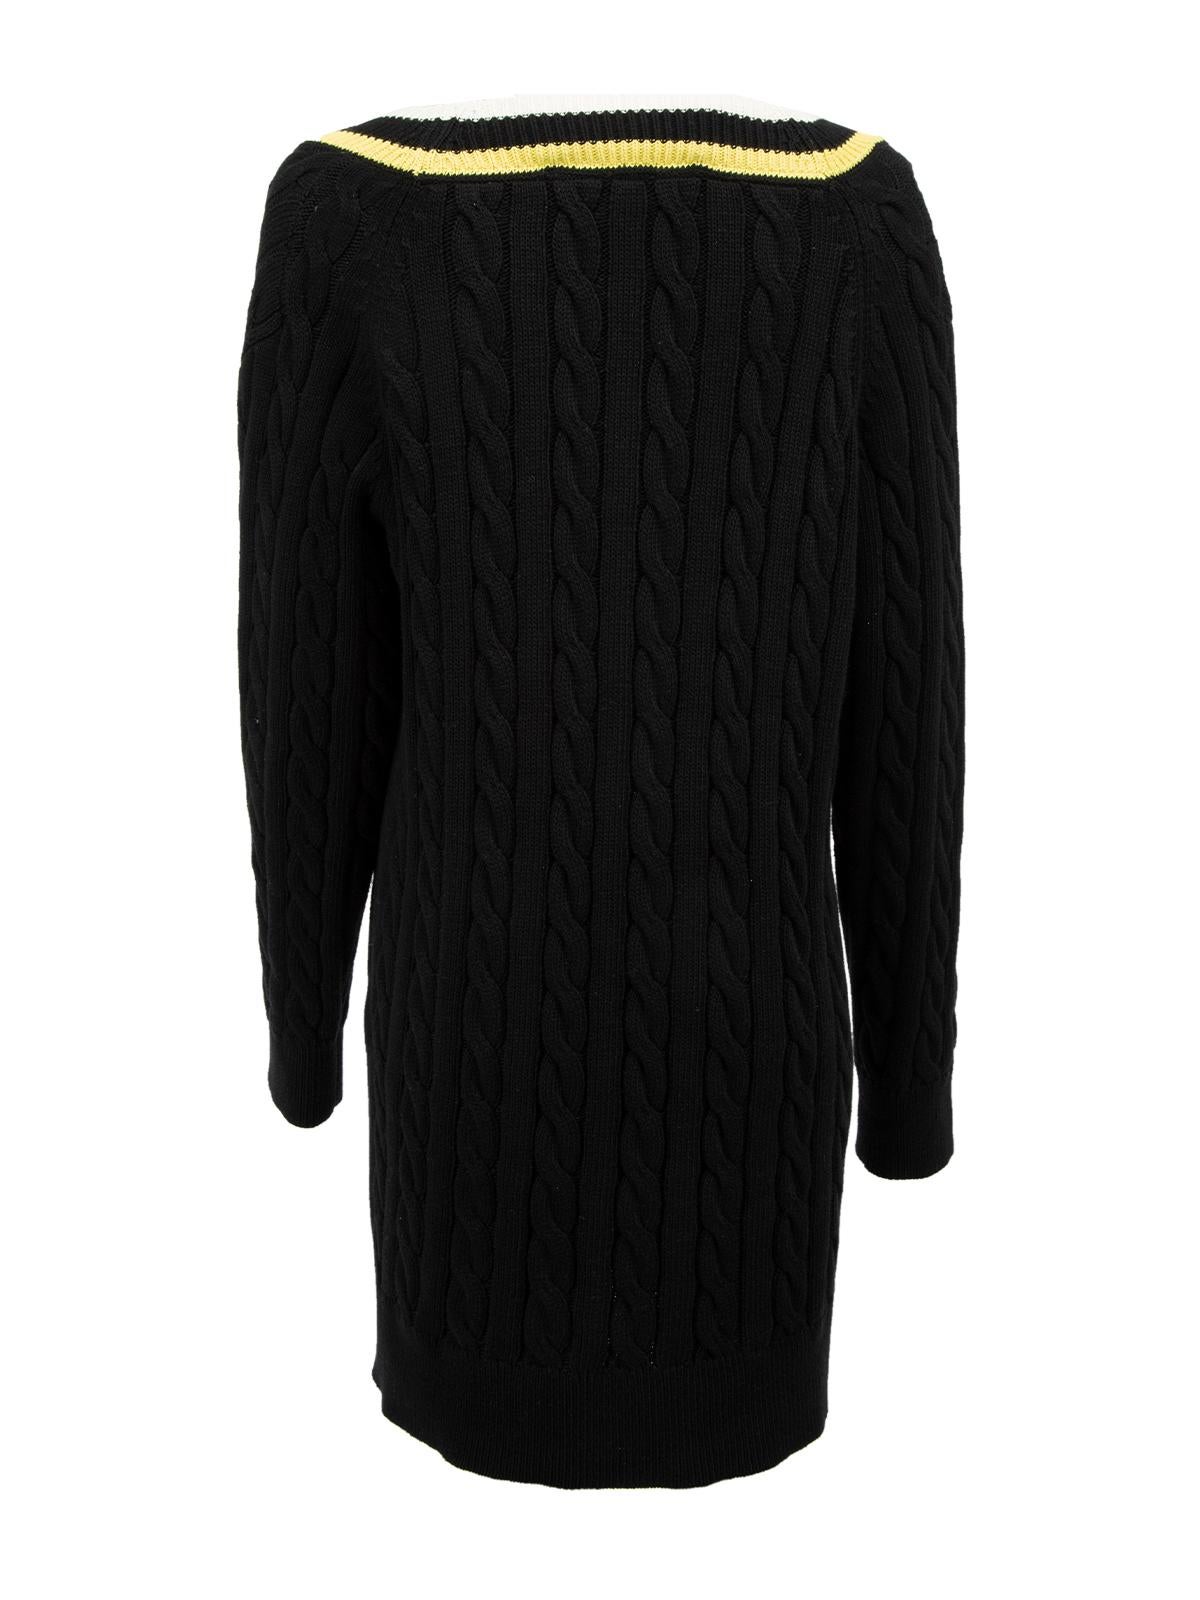 Pre-Loved Alexander Wang .T Women's Black Bilayer Off-The-Shoulder Cable Knit In Excellent Condition In London, GB